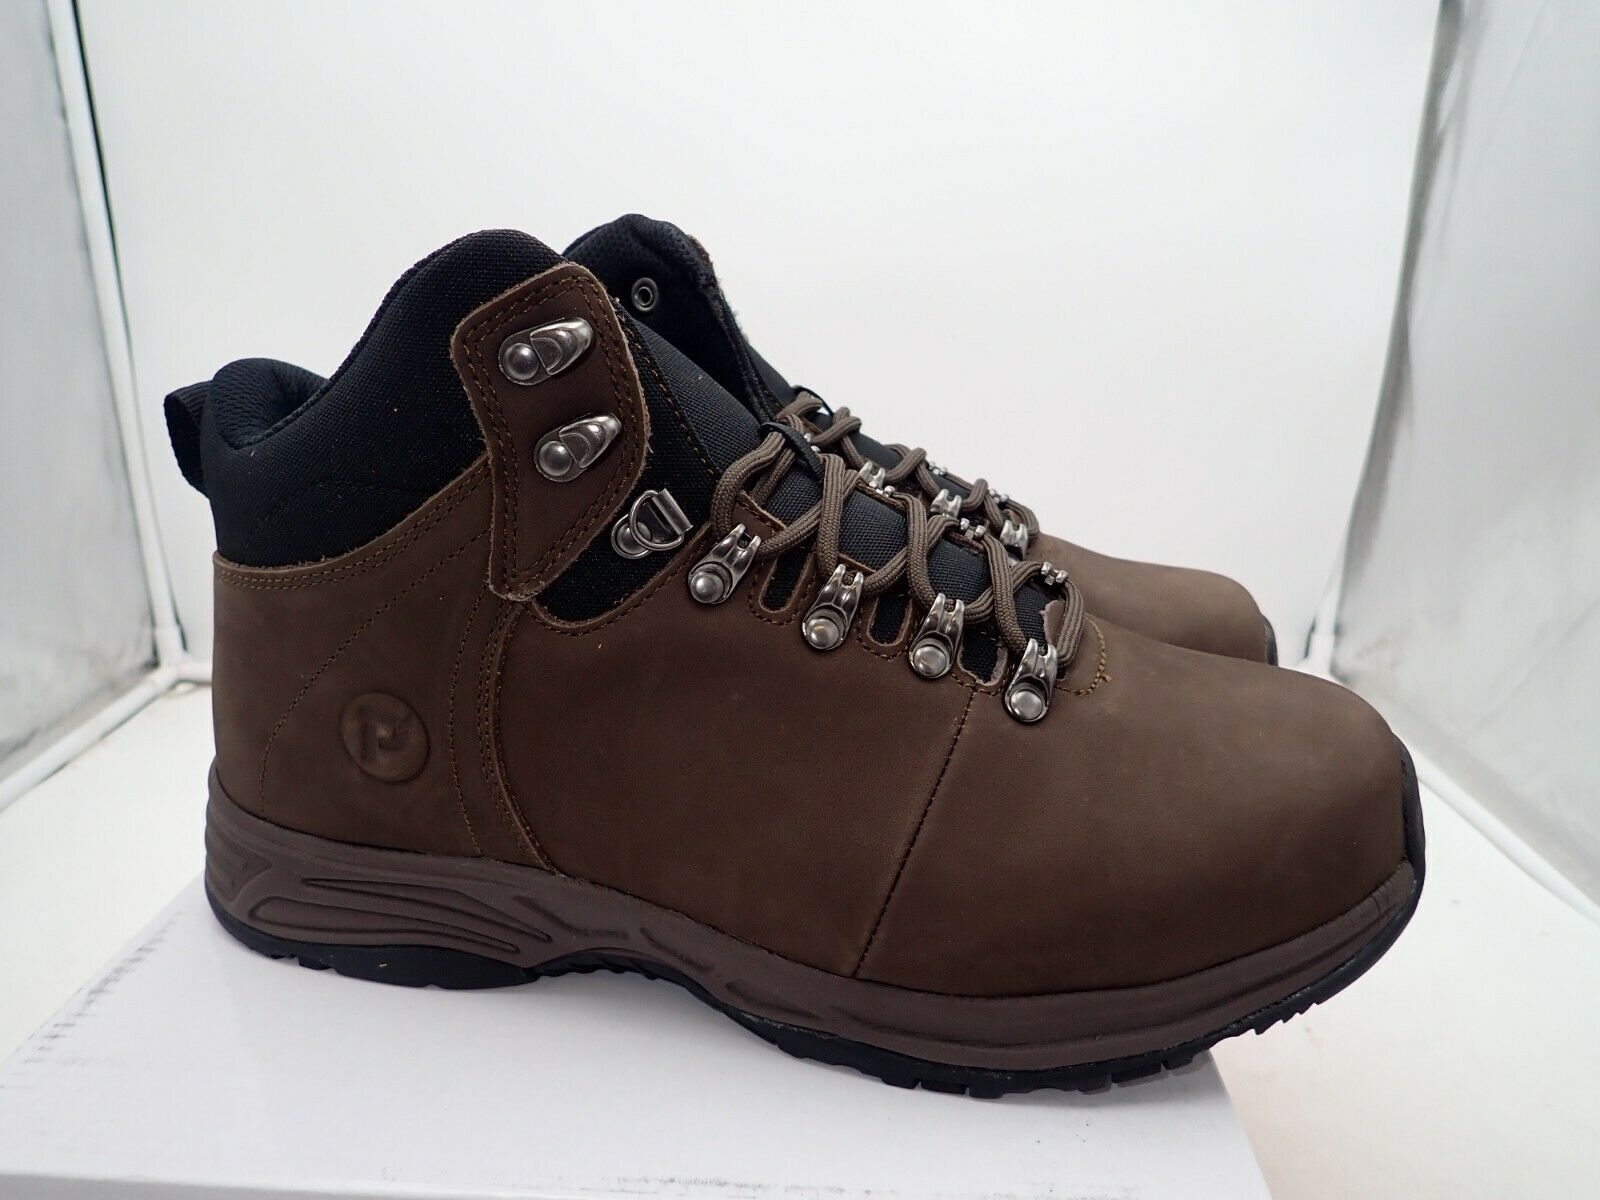 Propet Cody Men's Hiking Boots size 10 XXW Brown